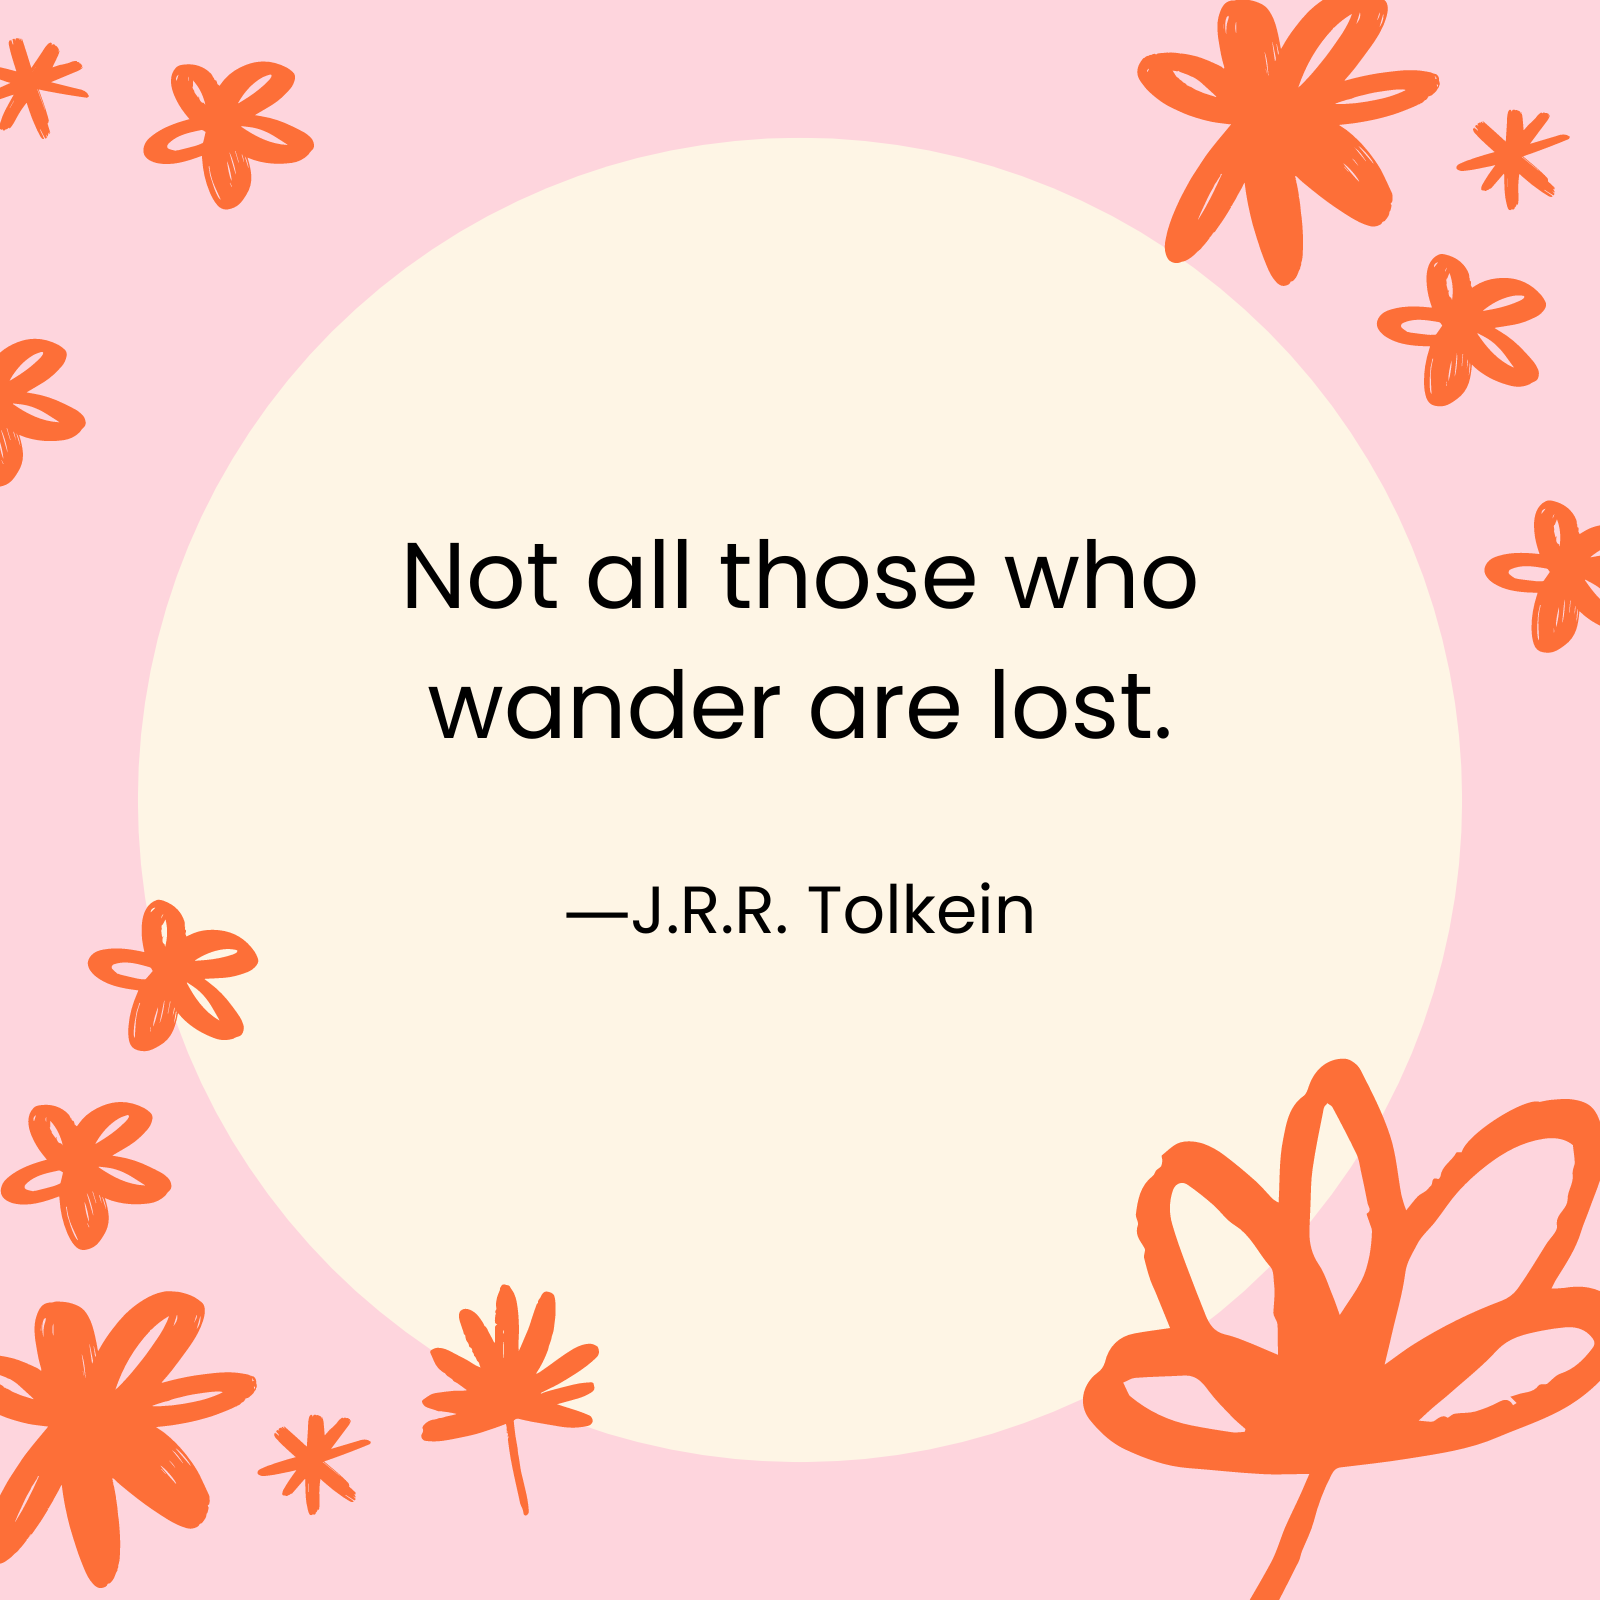 <p>"Not all those who wander are lost." —J.R.R. Tolkein </p>